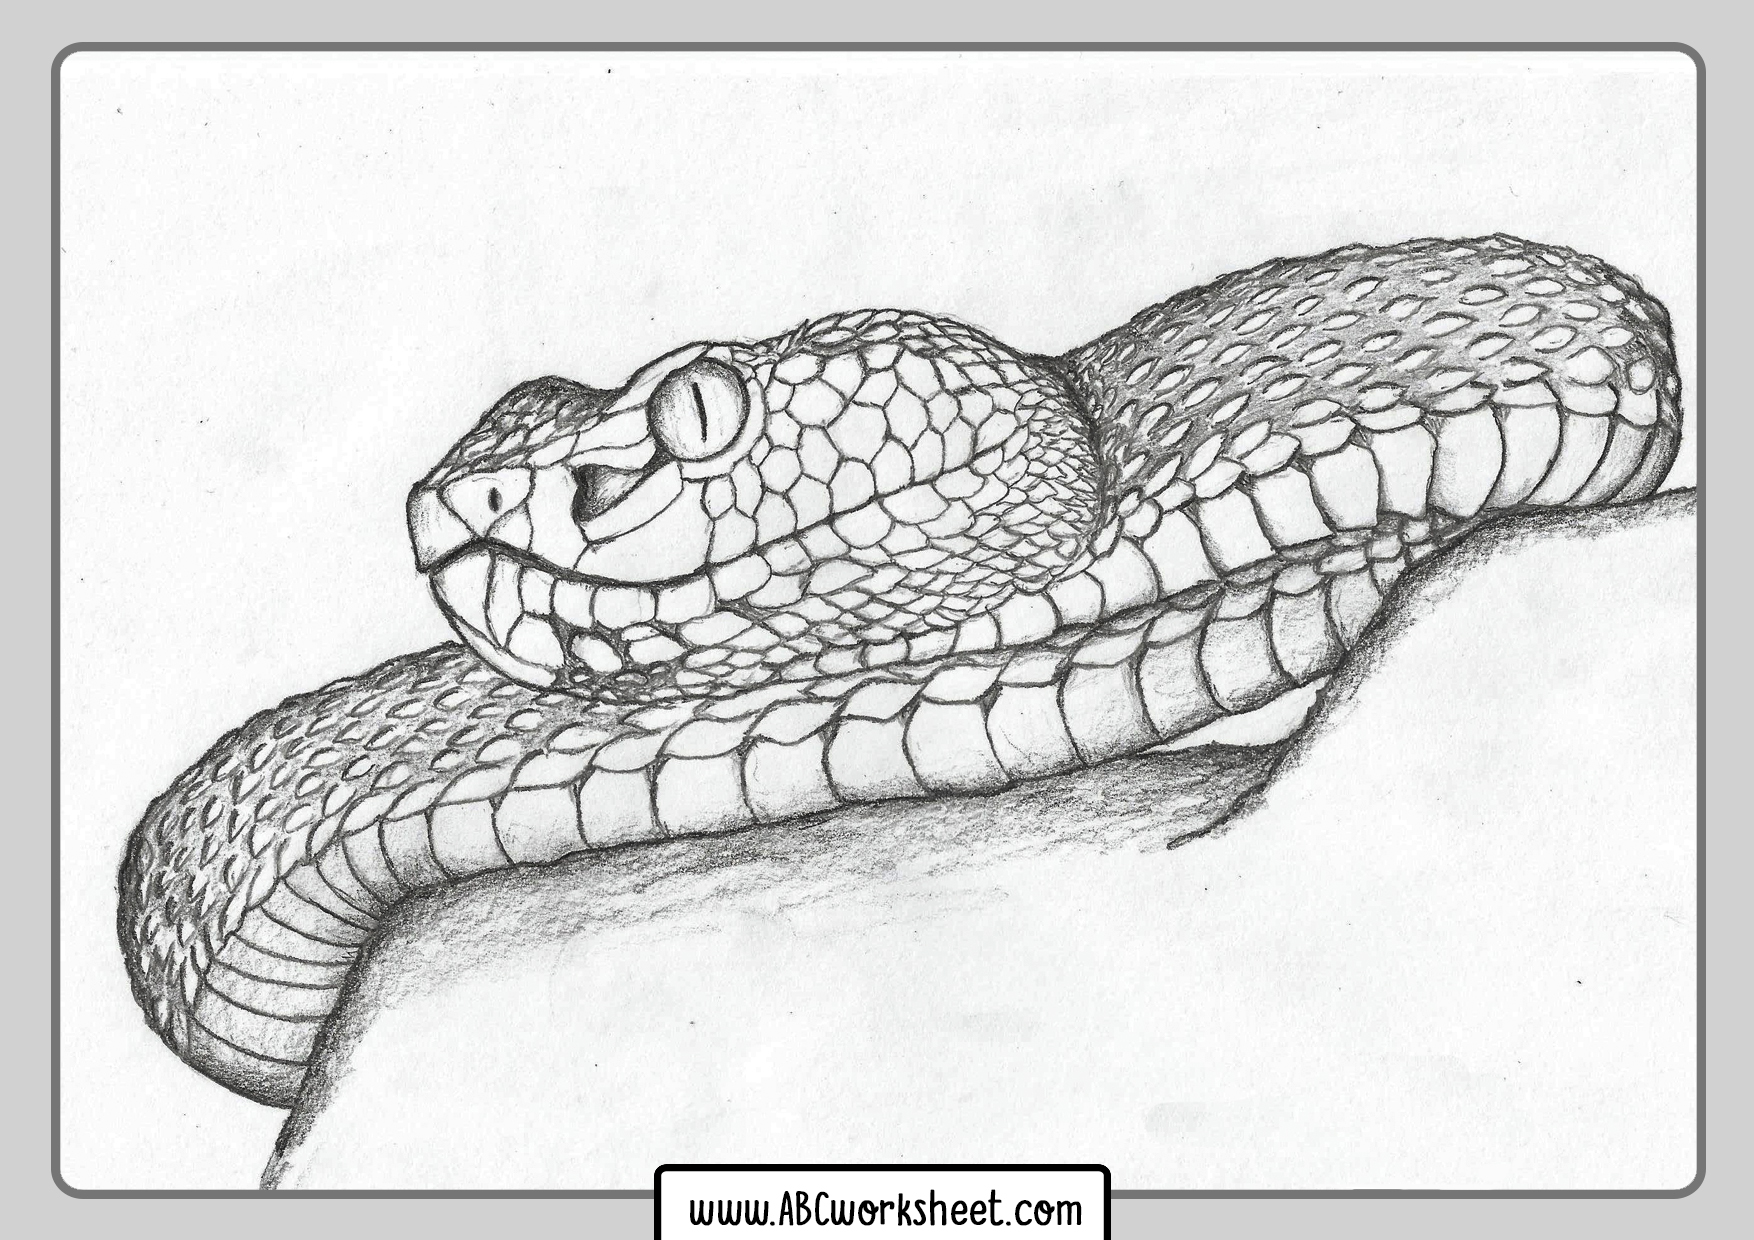 coloring-pages-of-snakes-realistic